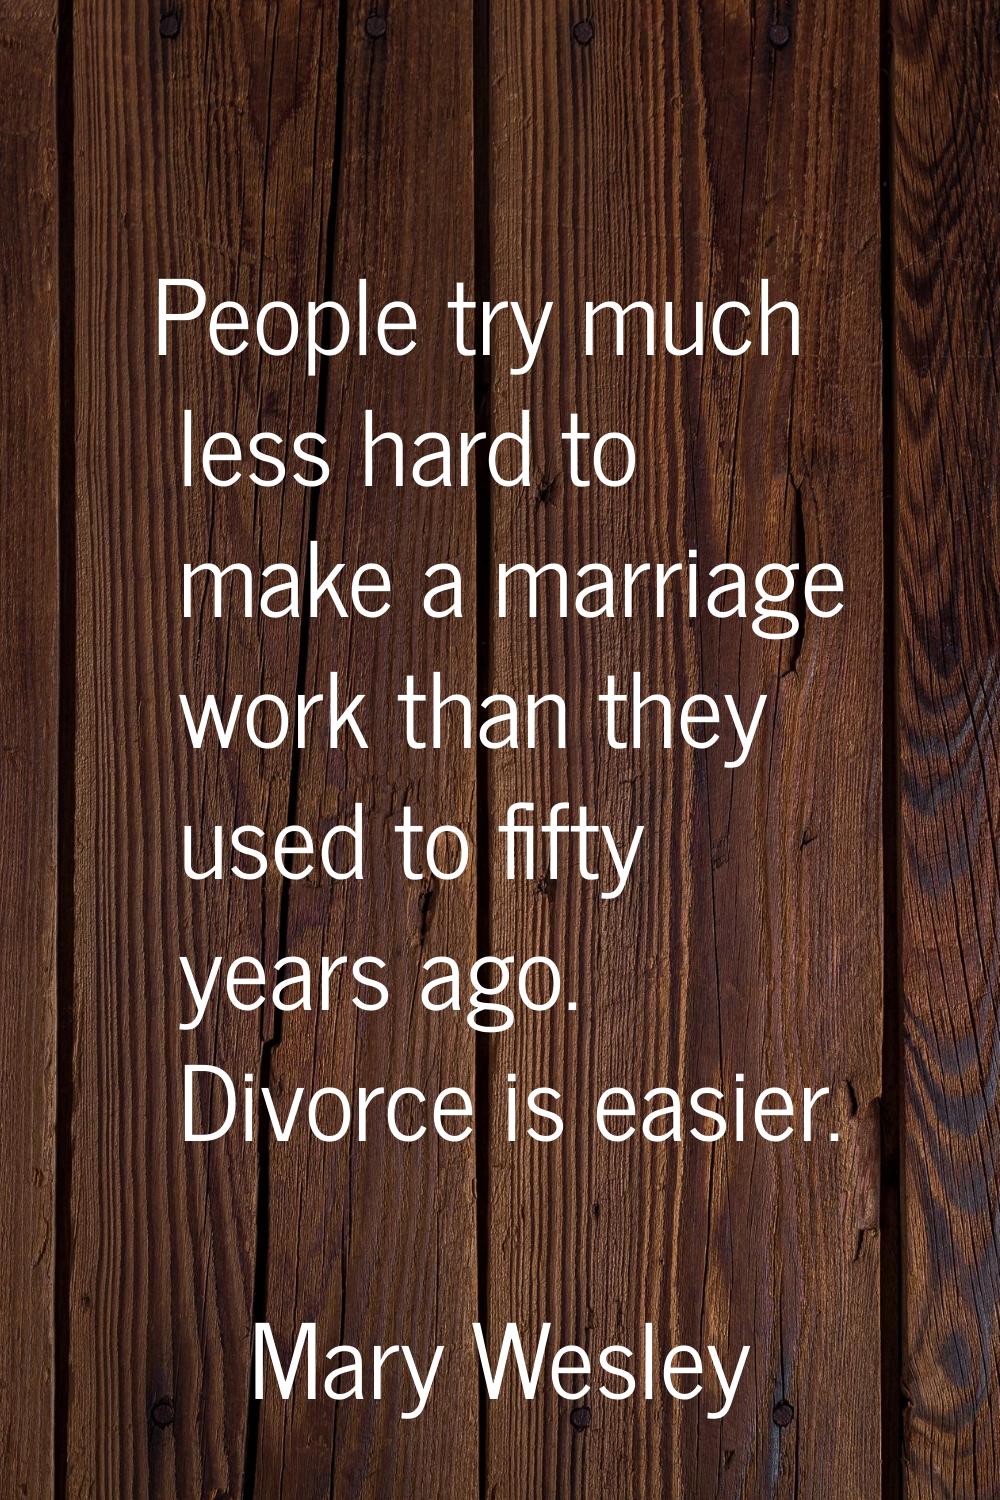 People try much less hard to make a marriage work than they used to fifty years ago. Divorce is eas